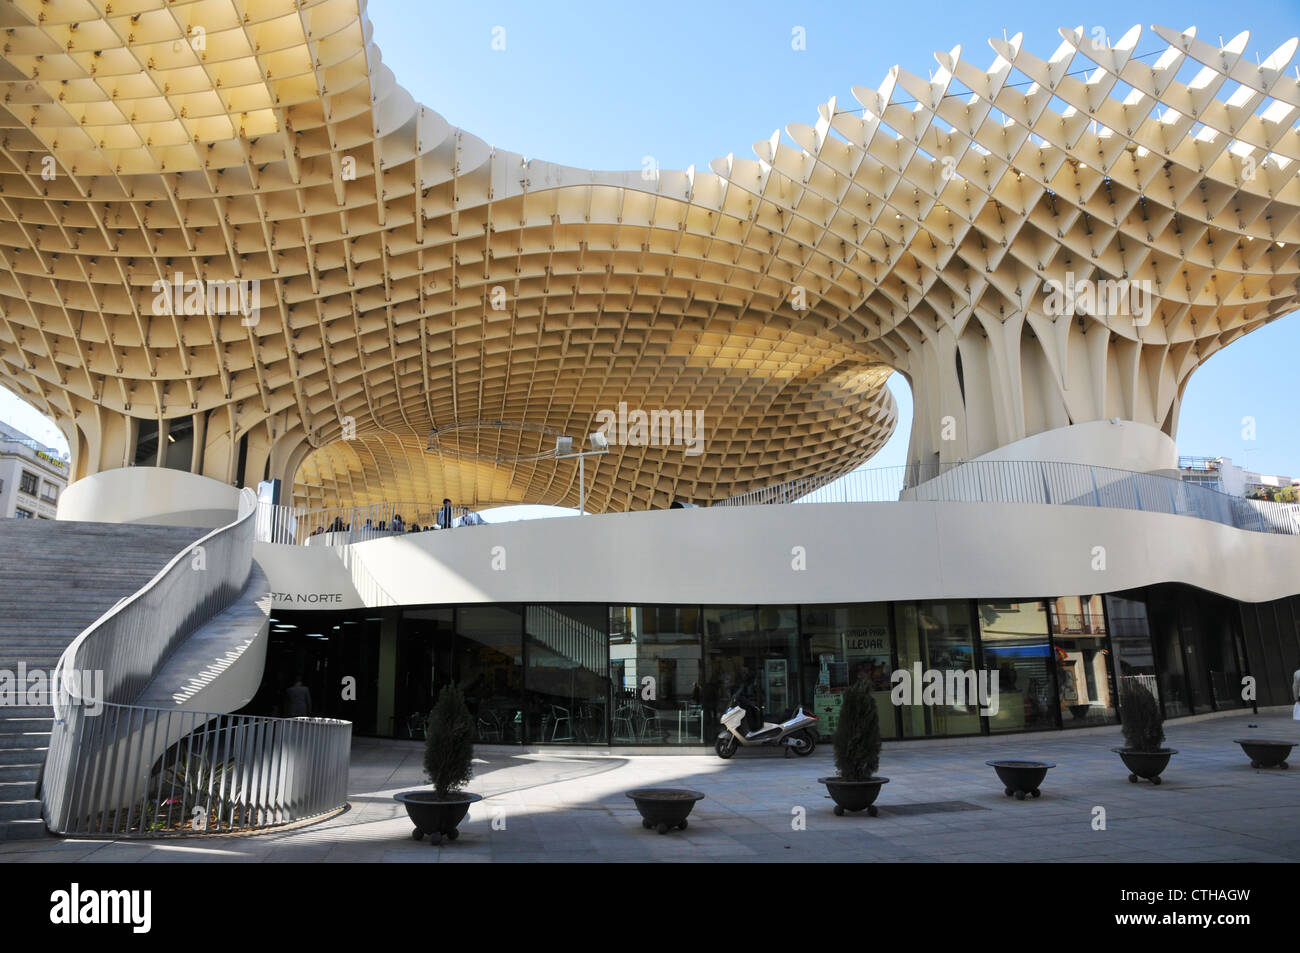 Looking up at modern architectural roof in Plaza de la Encarnacion, Seville, Spain. Stock Photo